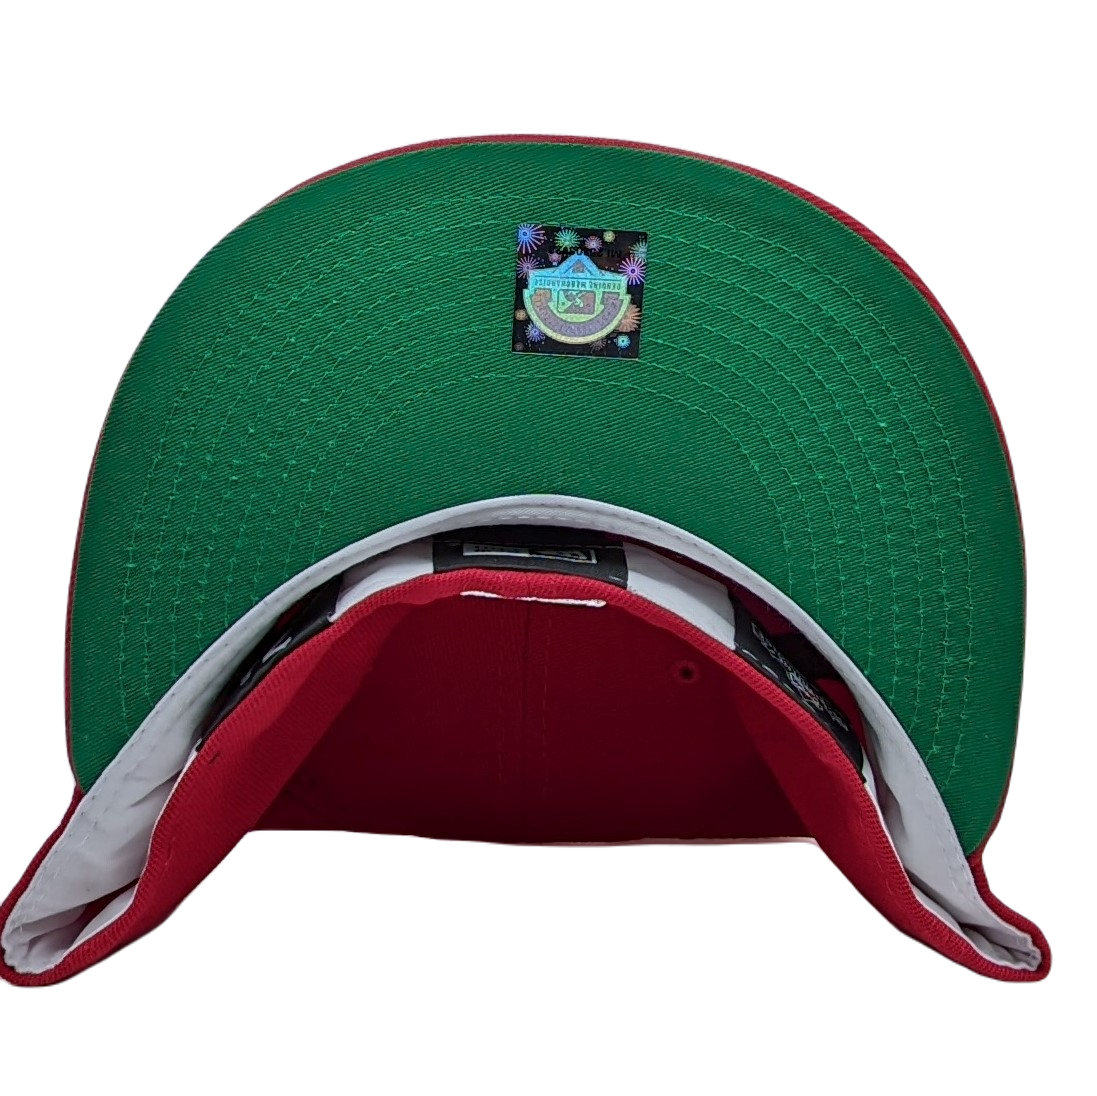 New Era 59Fifty Buffalo Bisons Red with Green UV Fitted Hat